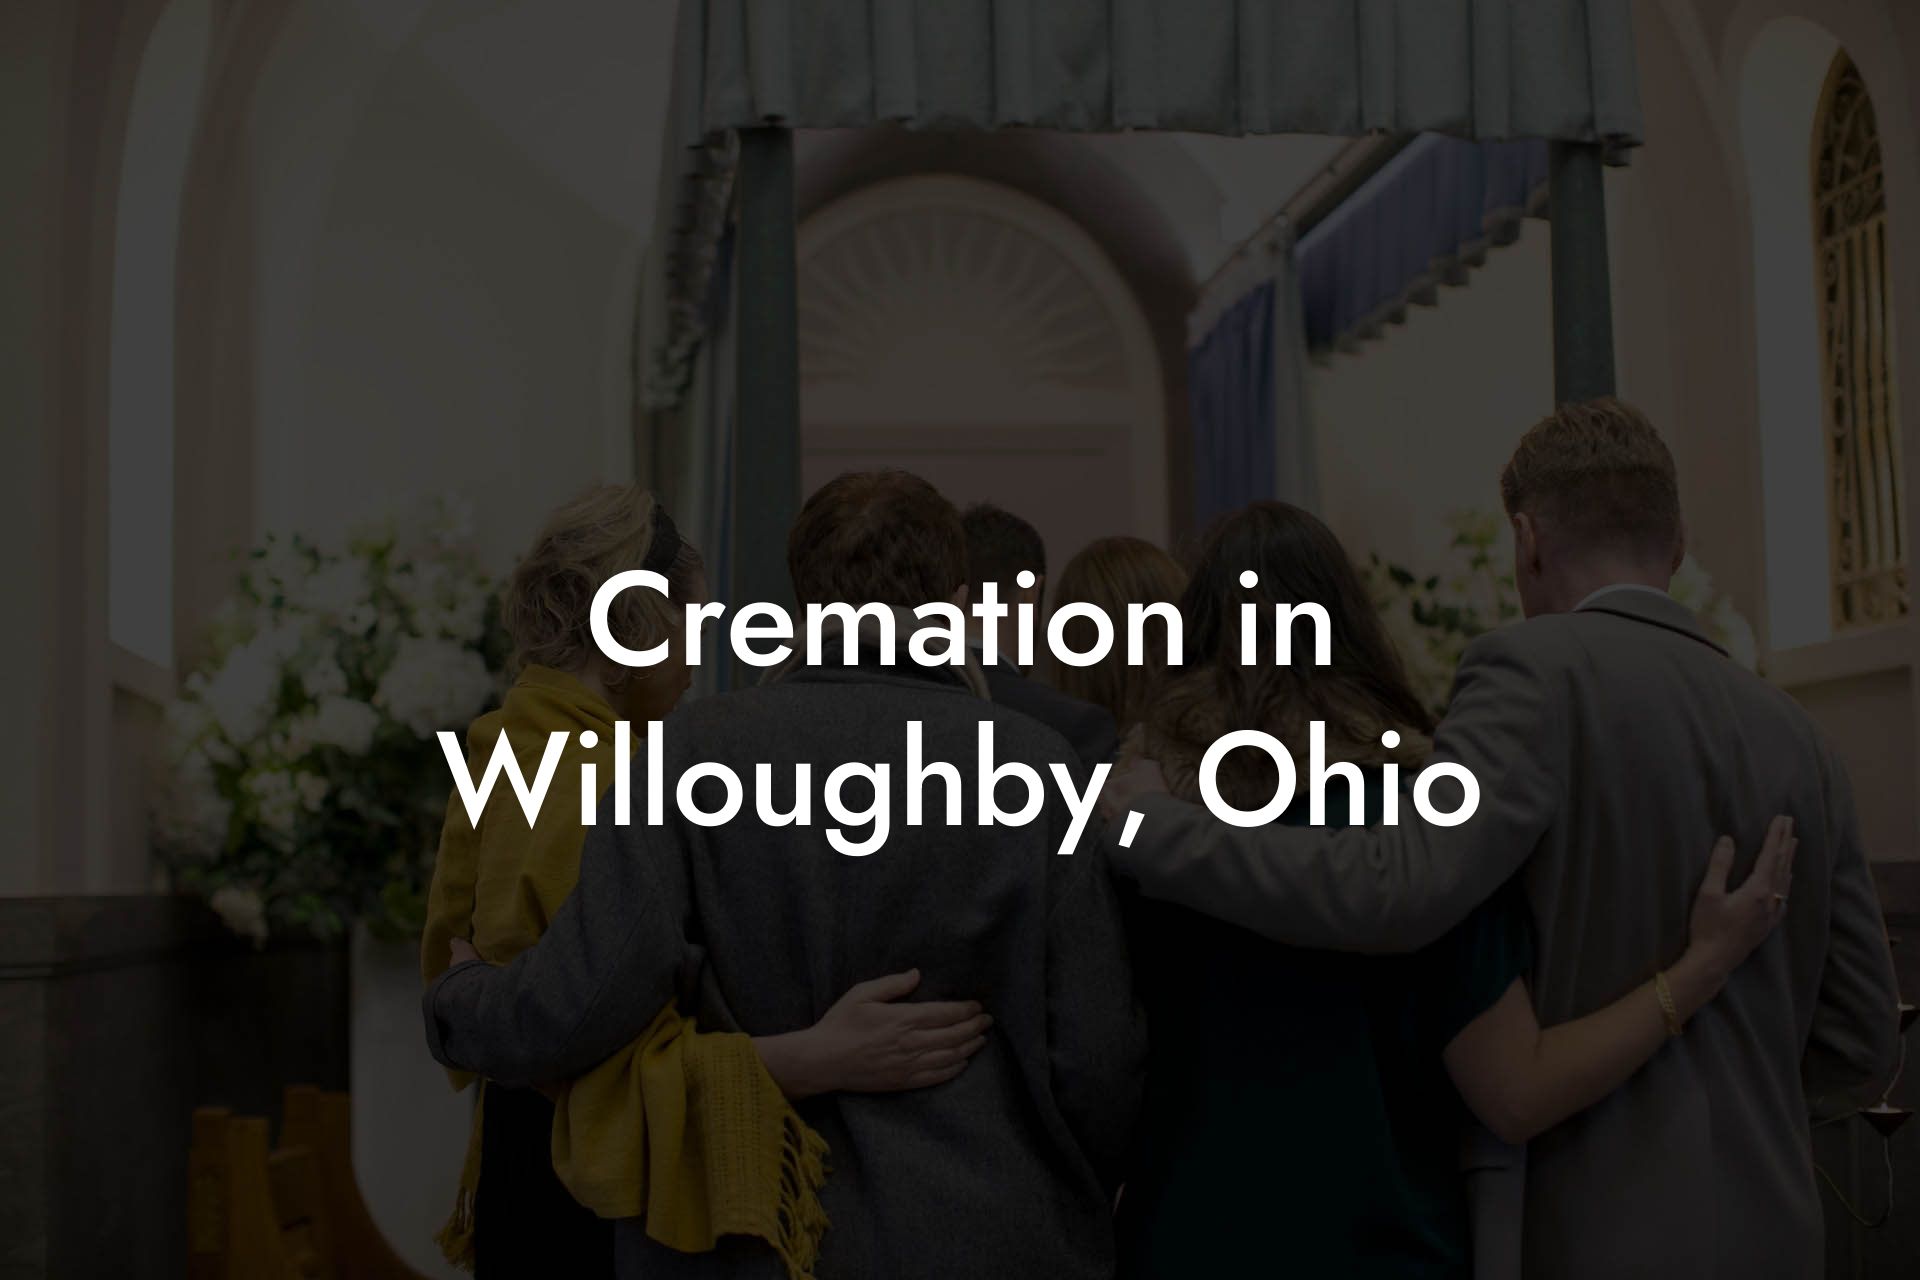 Cremation in Willoughby, Ohio